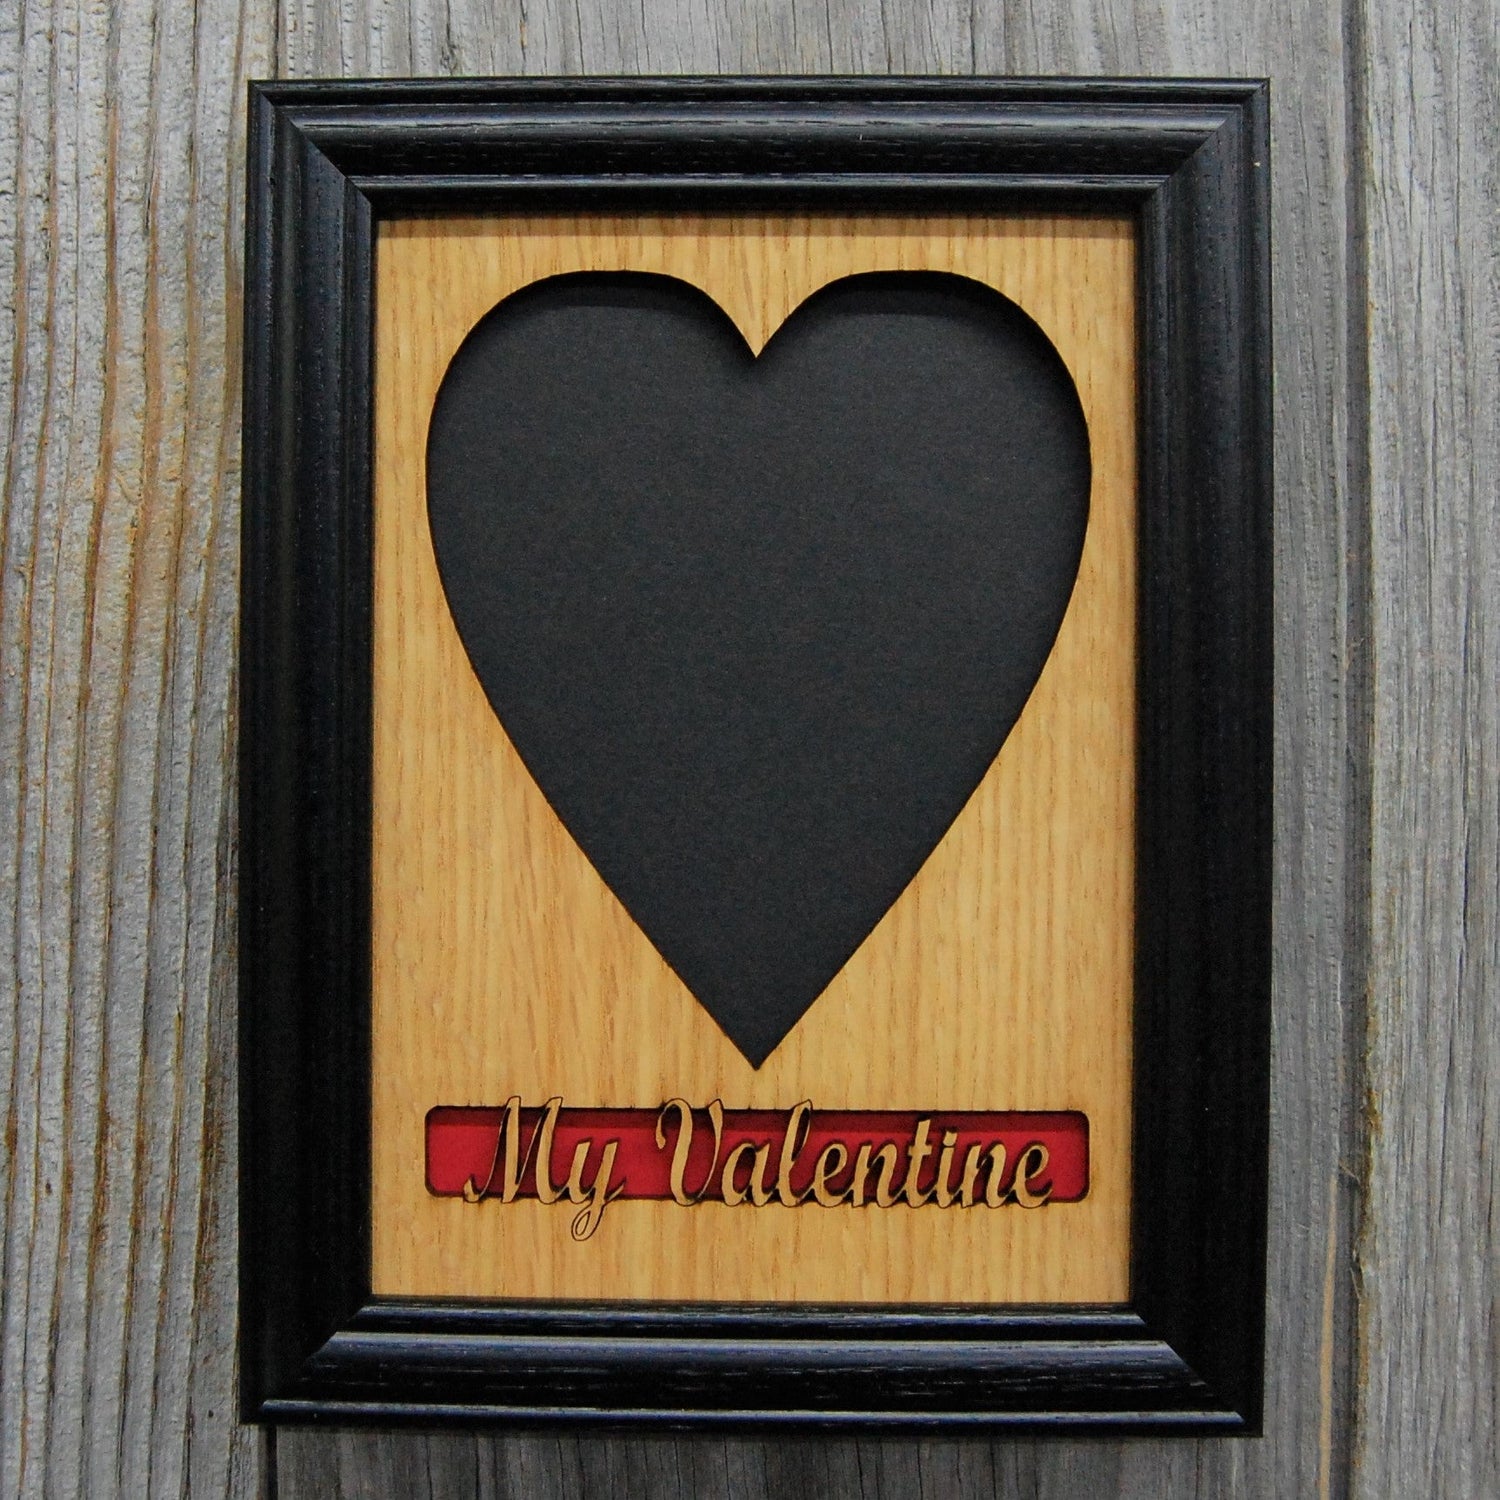 My Valentines Picture Frame - 5x7 Frame Holds 1 or 2 Photos - Legacy Images - Picture Frames